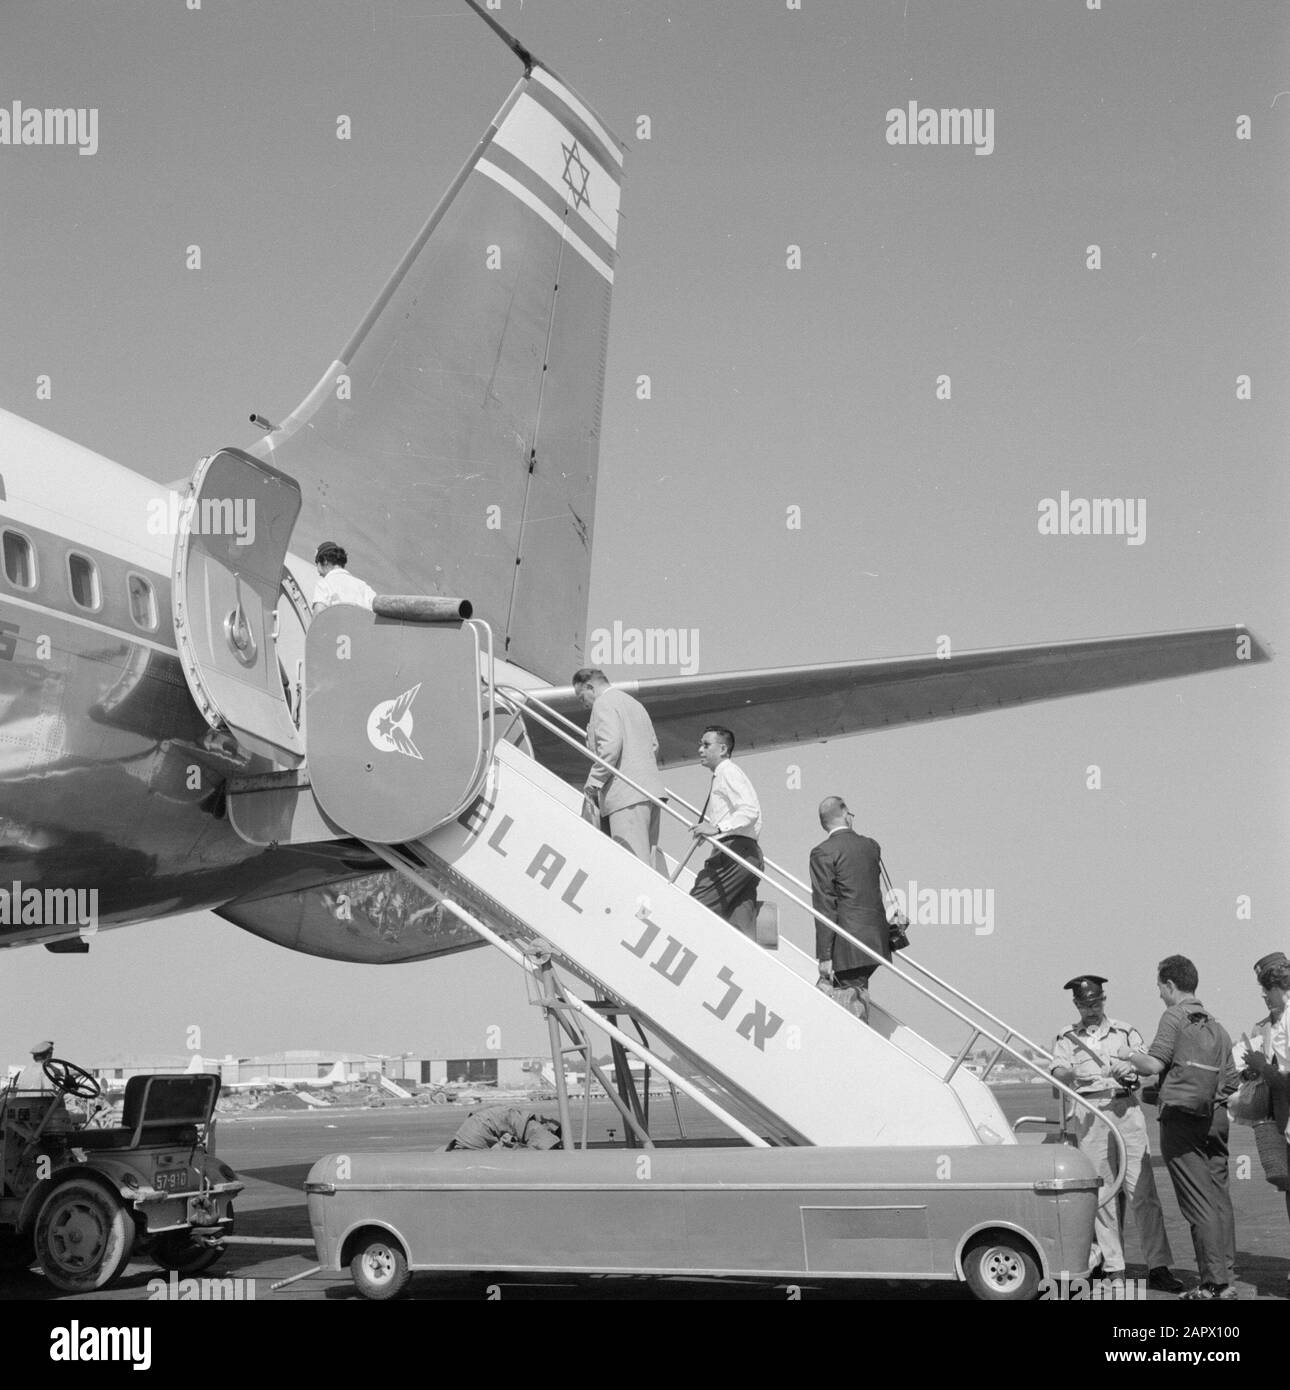 Israel: Lydda Airport (Lod)  Passengers board an airline El Al Airline Date: undated Location: Israel, Lod Airport, Lydda Airport Keywords: arrival and departure, aviation, travelers, stairs, airports Stock Photo